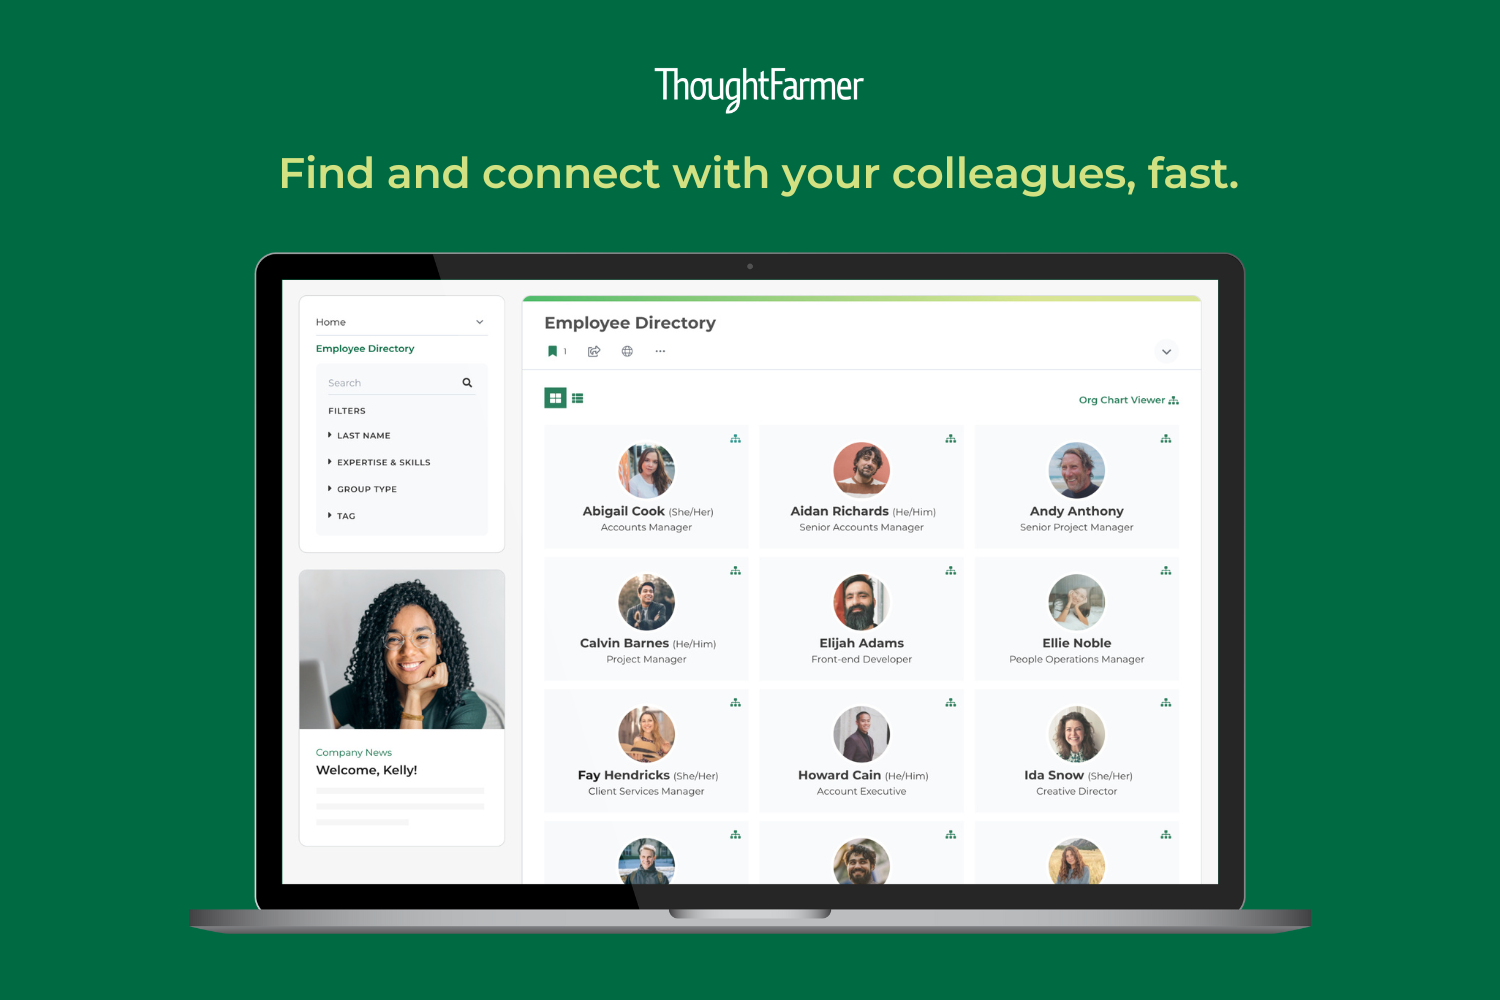 ThoughtFarmer's comprehensive people directory mean you can find and connect with subject matter experts, quickly